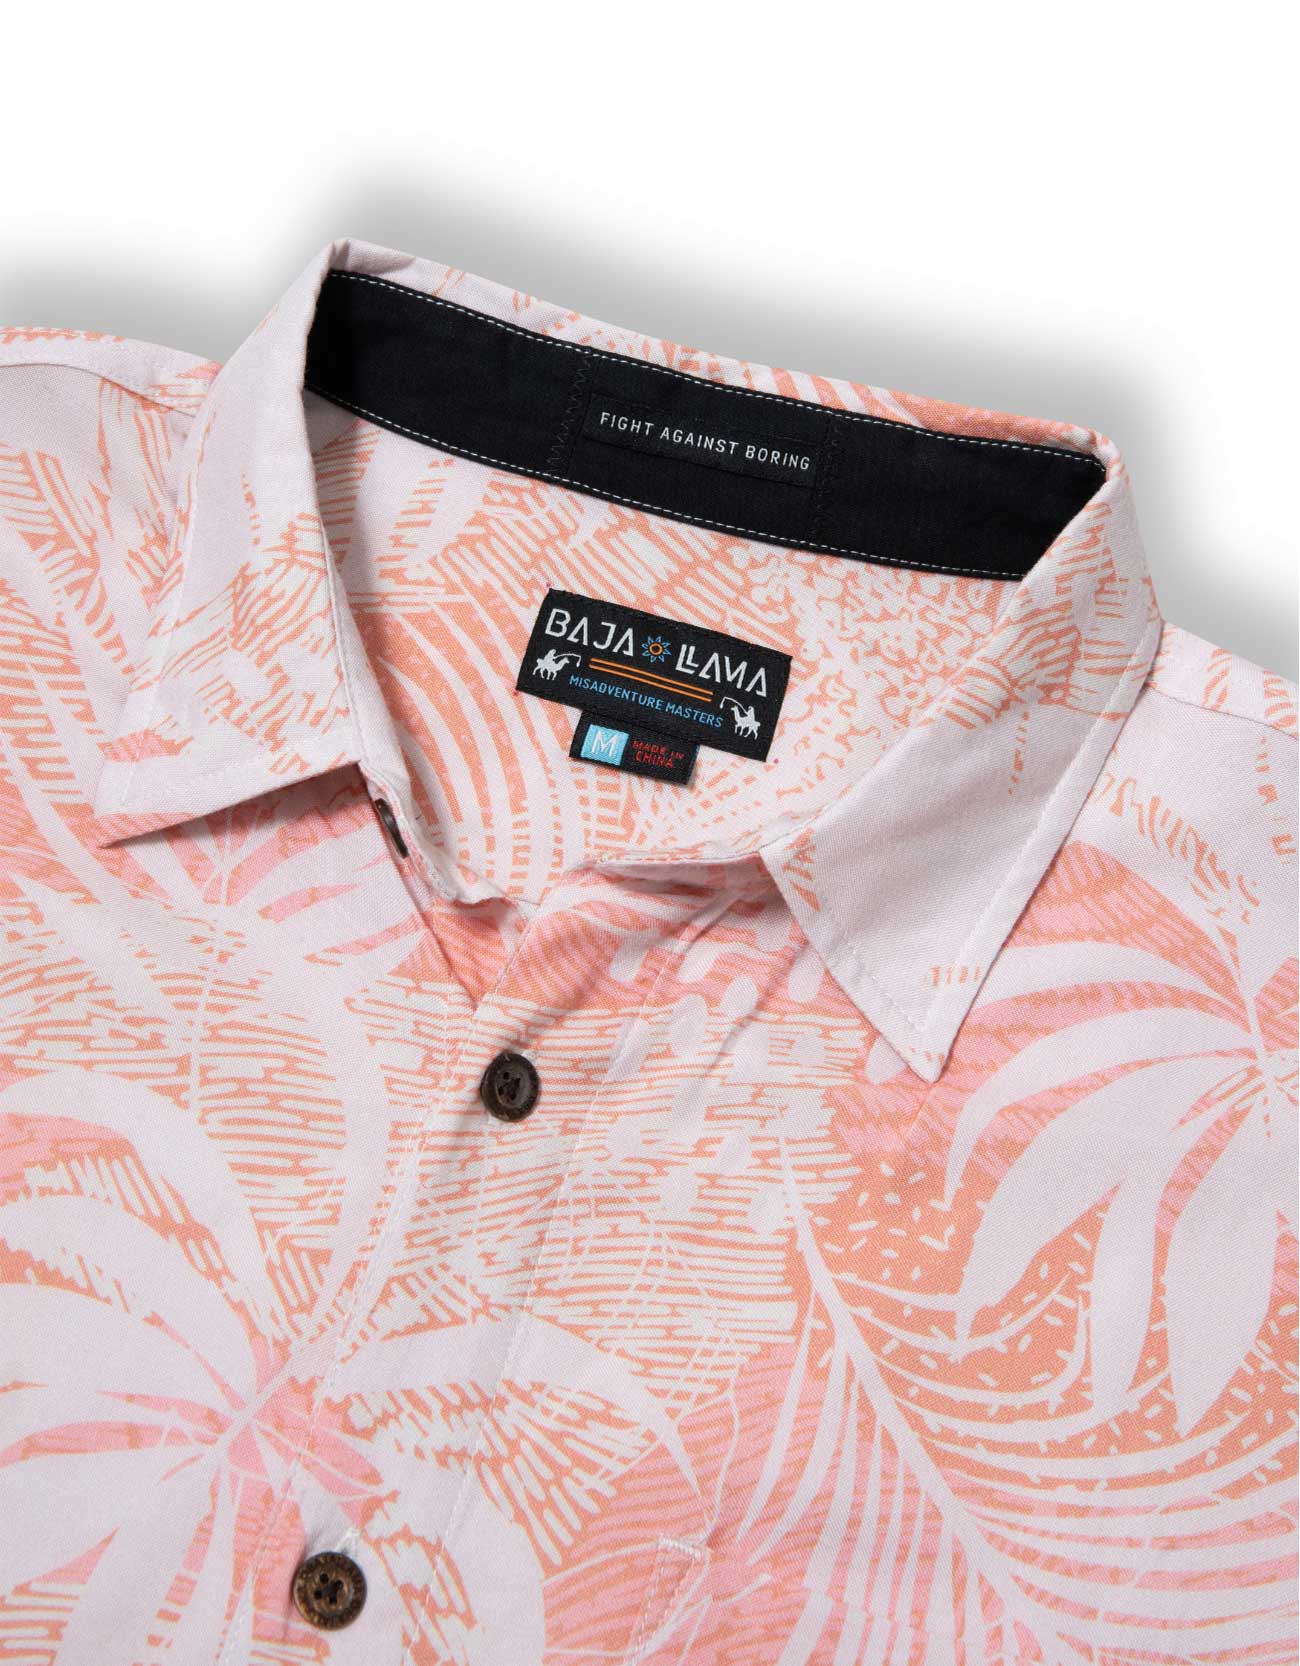 Peach colored button up shirt with tropical palm leaves print 